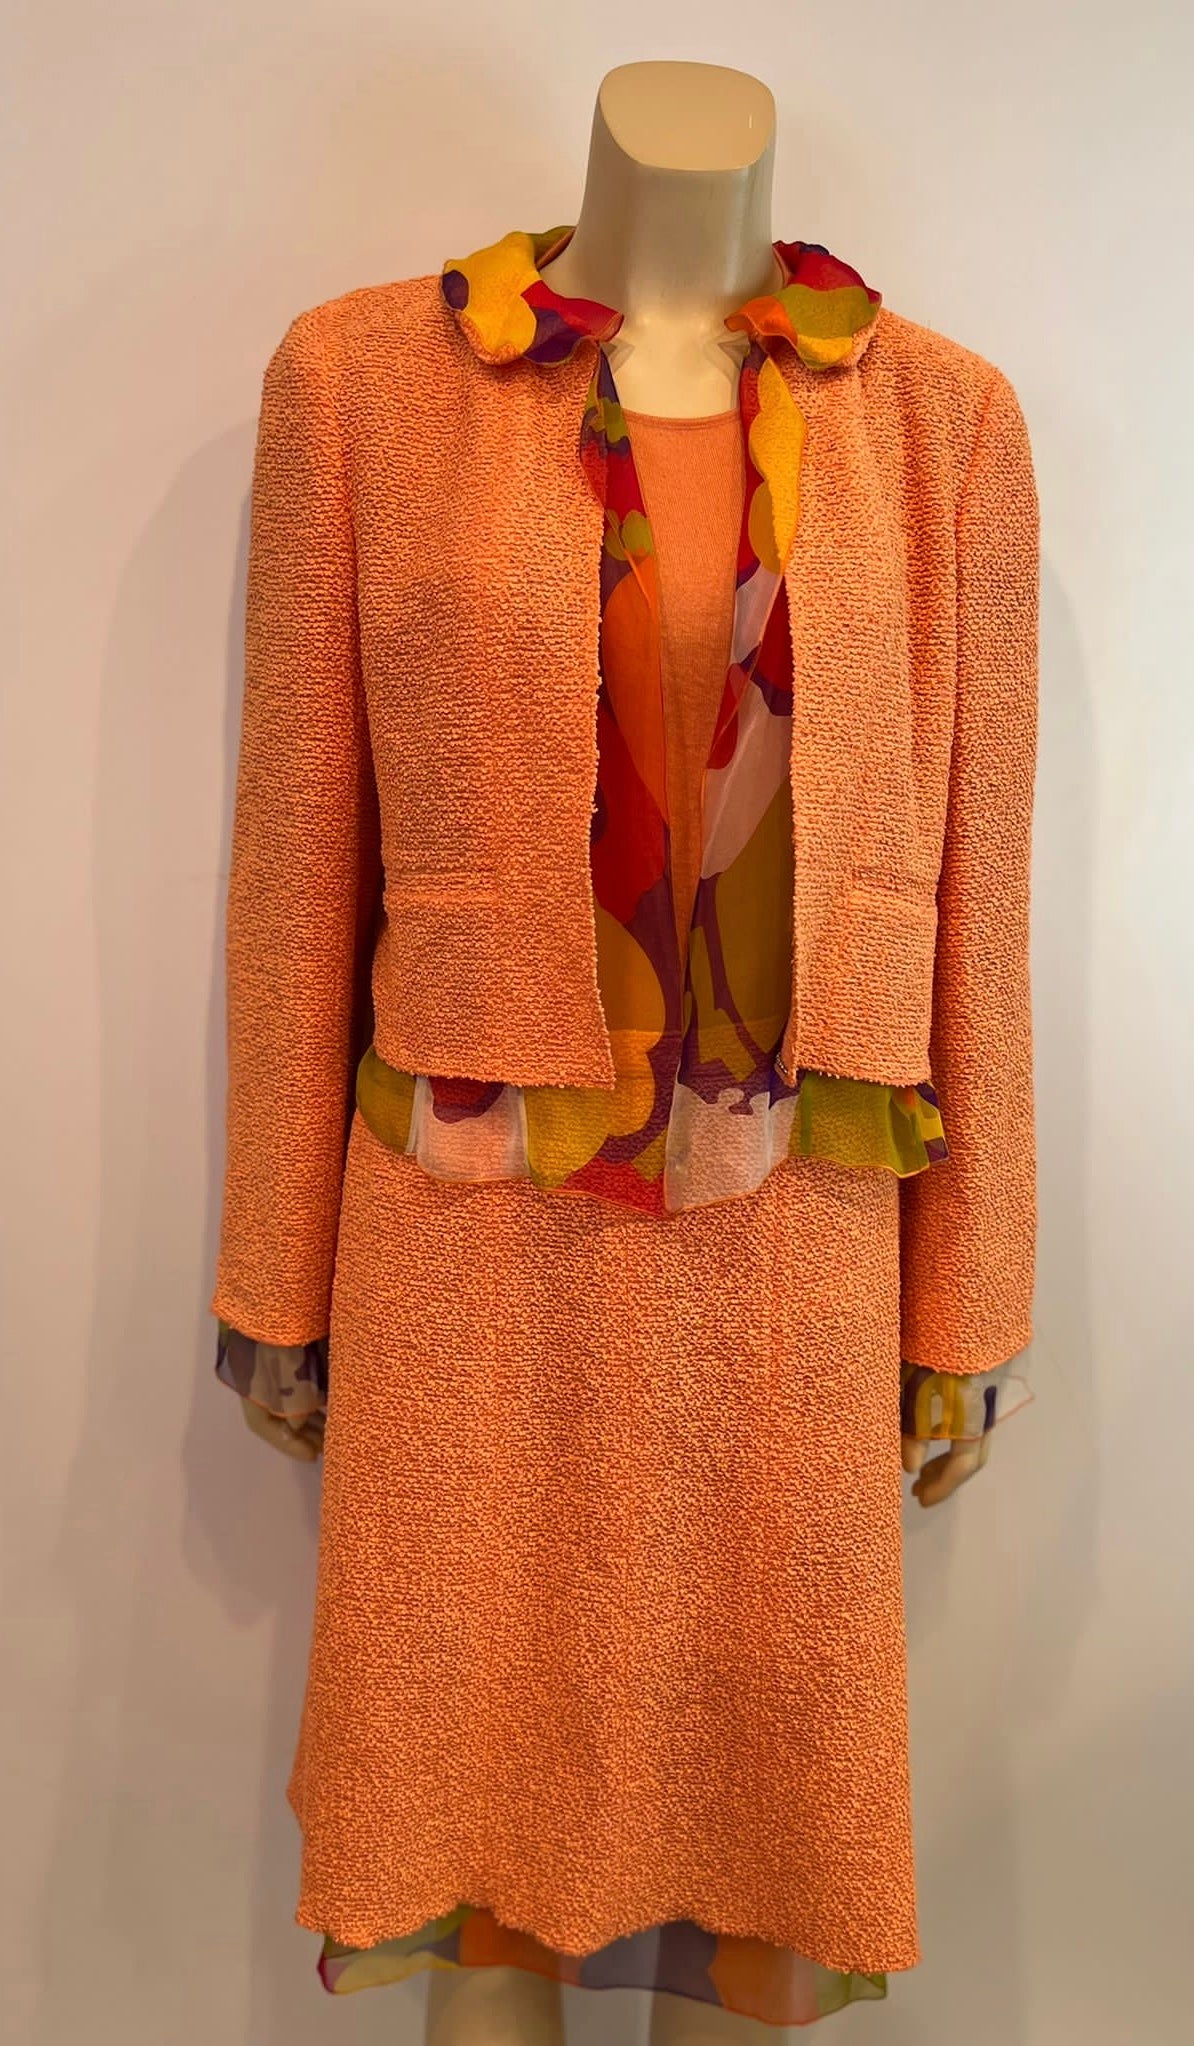 CHANEL NEW VINTAGE 2 PIECE TWEED SKIRT AND JACKET SUIT FR 38 NEW YELLOW CC  LOGO